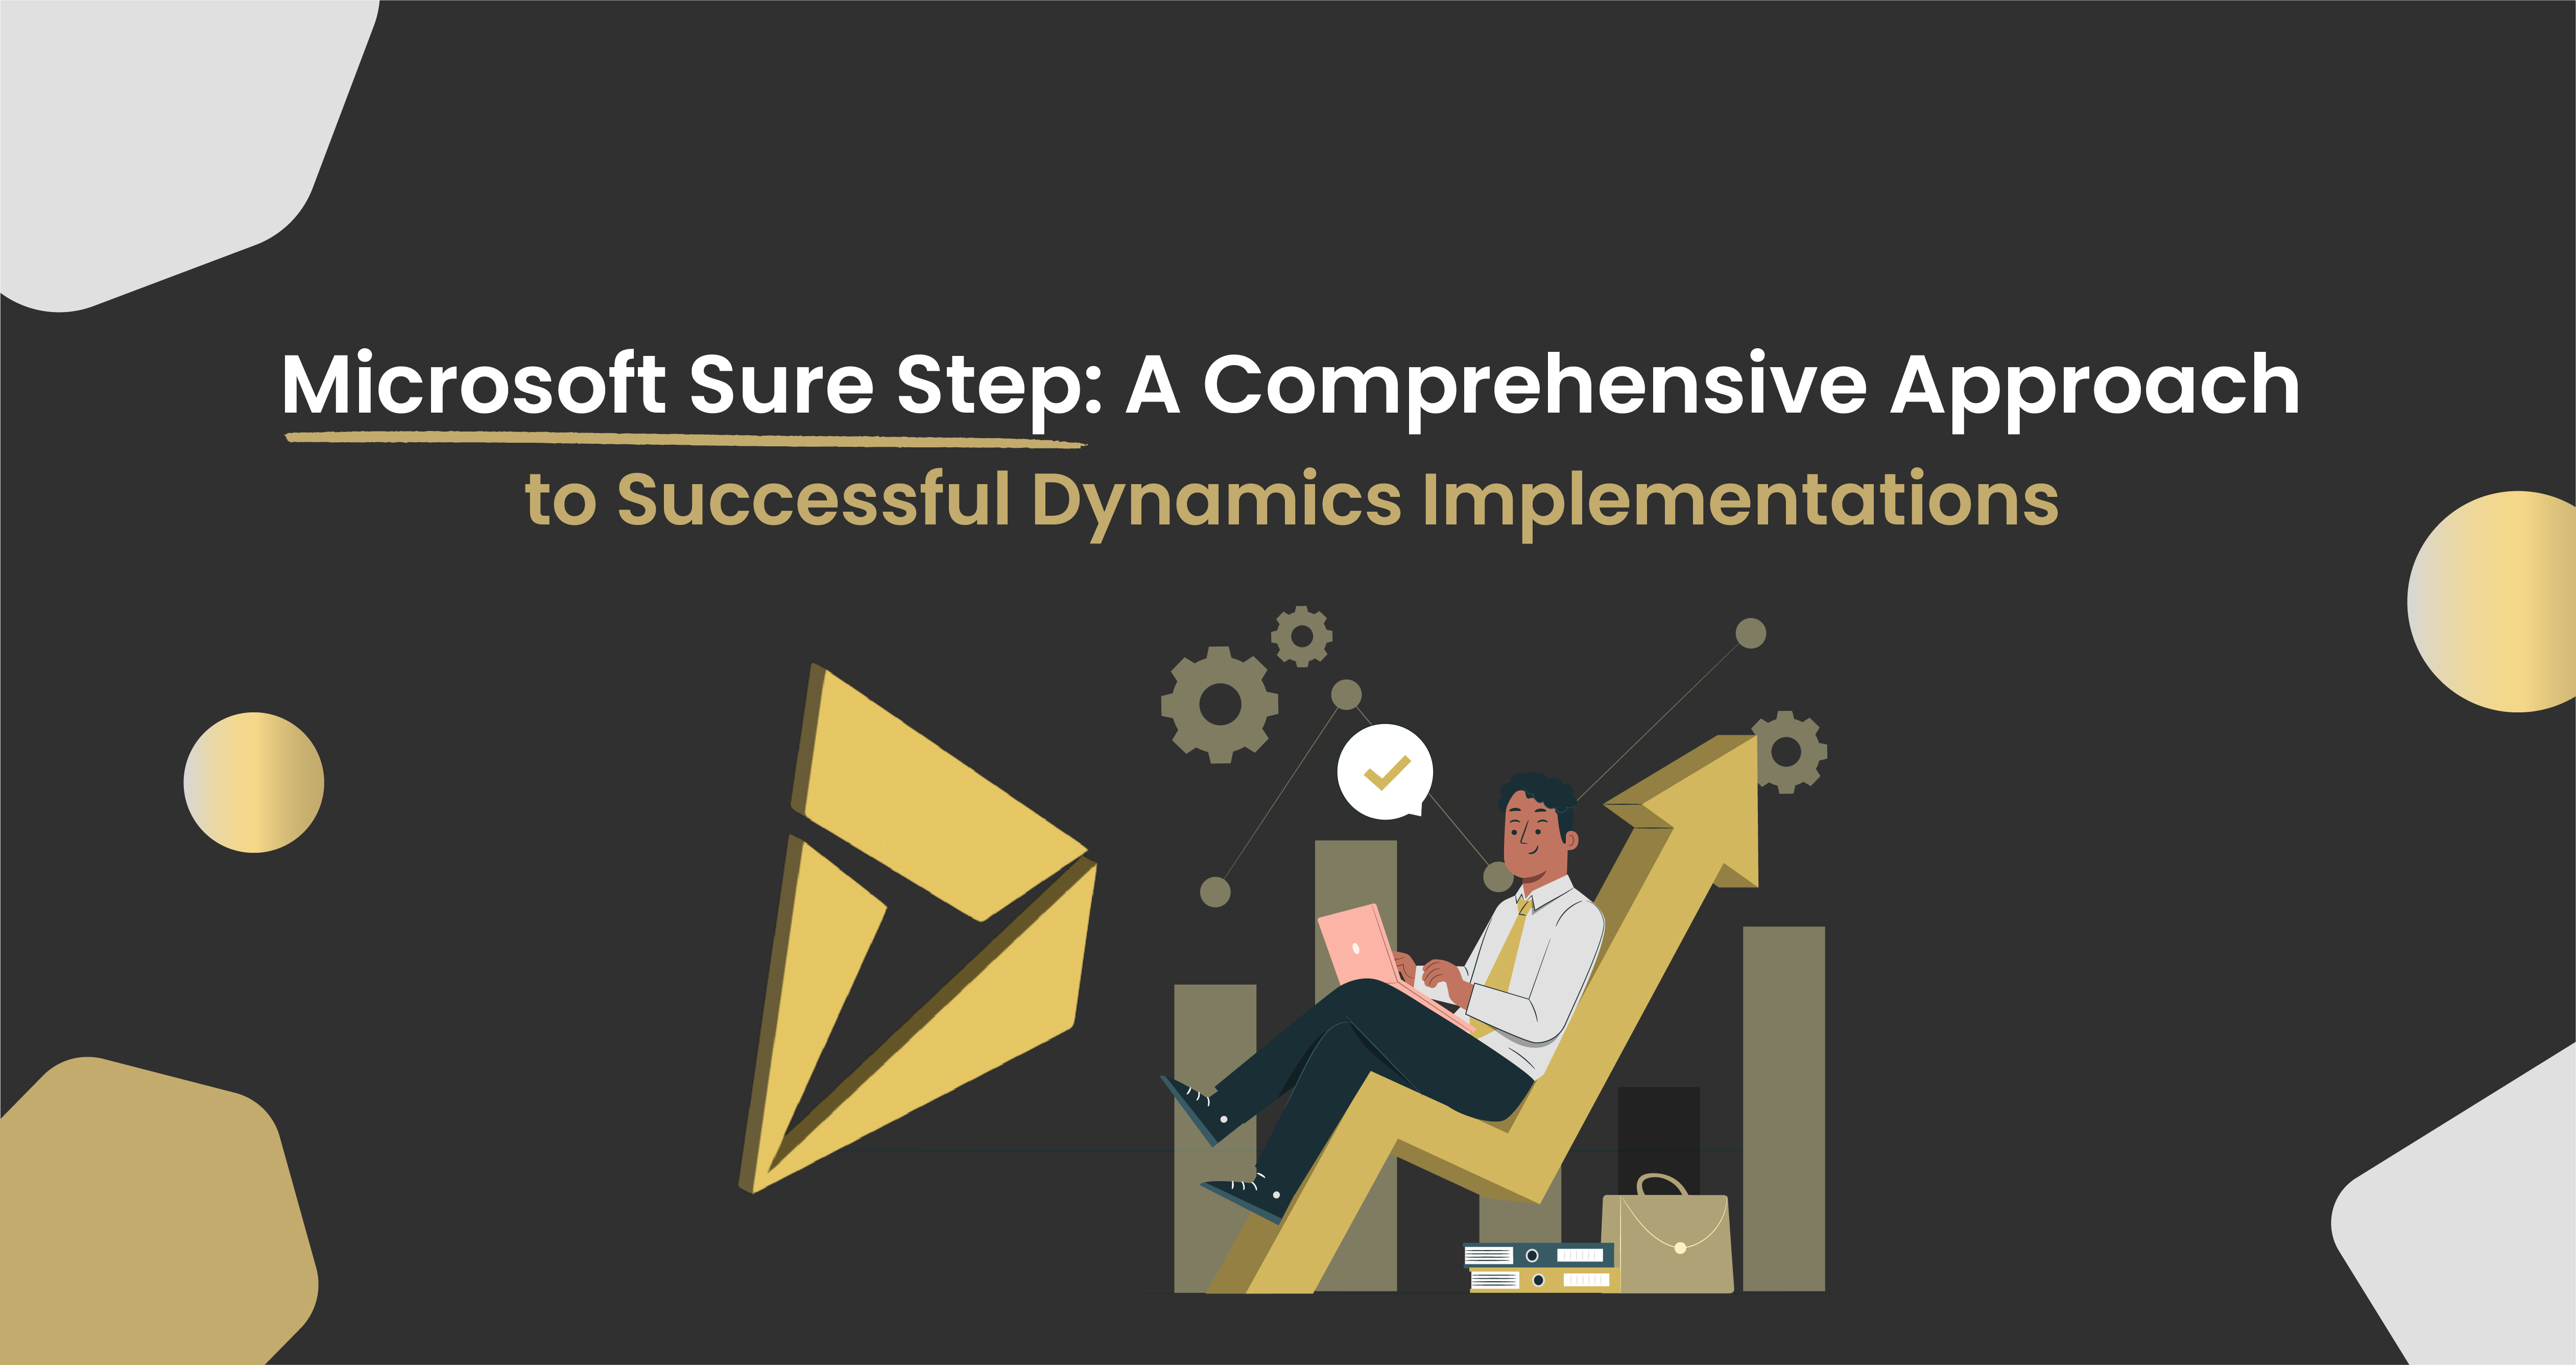 Microsoft Sure Step - A Comprehensive Approach to Successful Dynamics Implementations